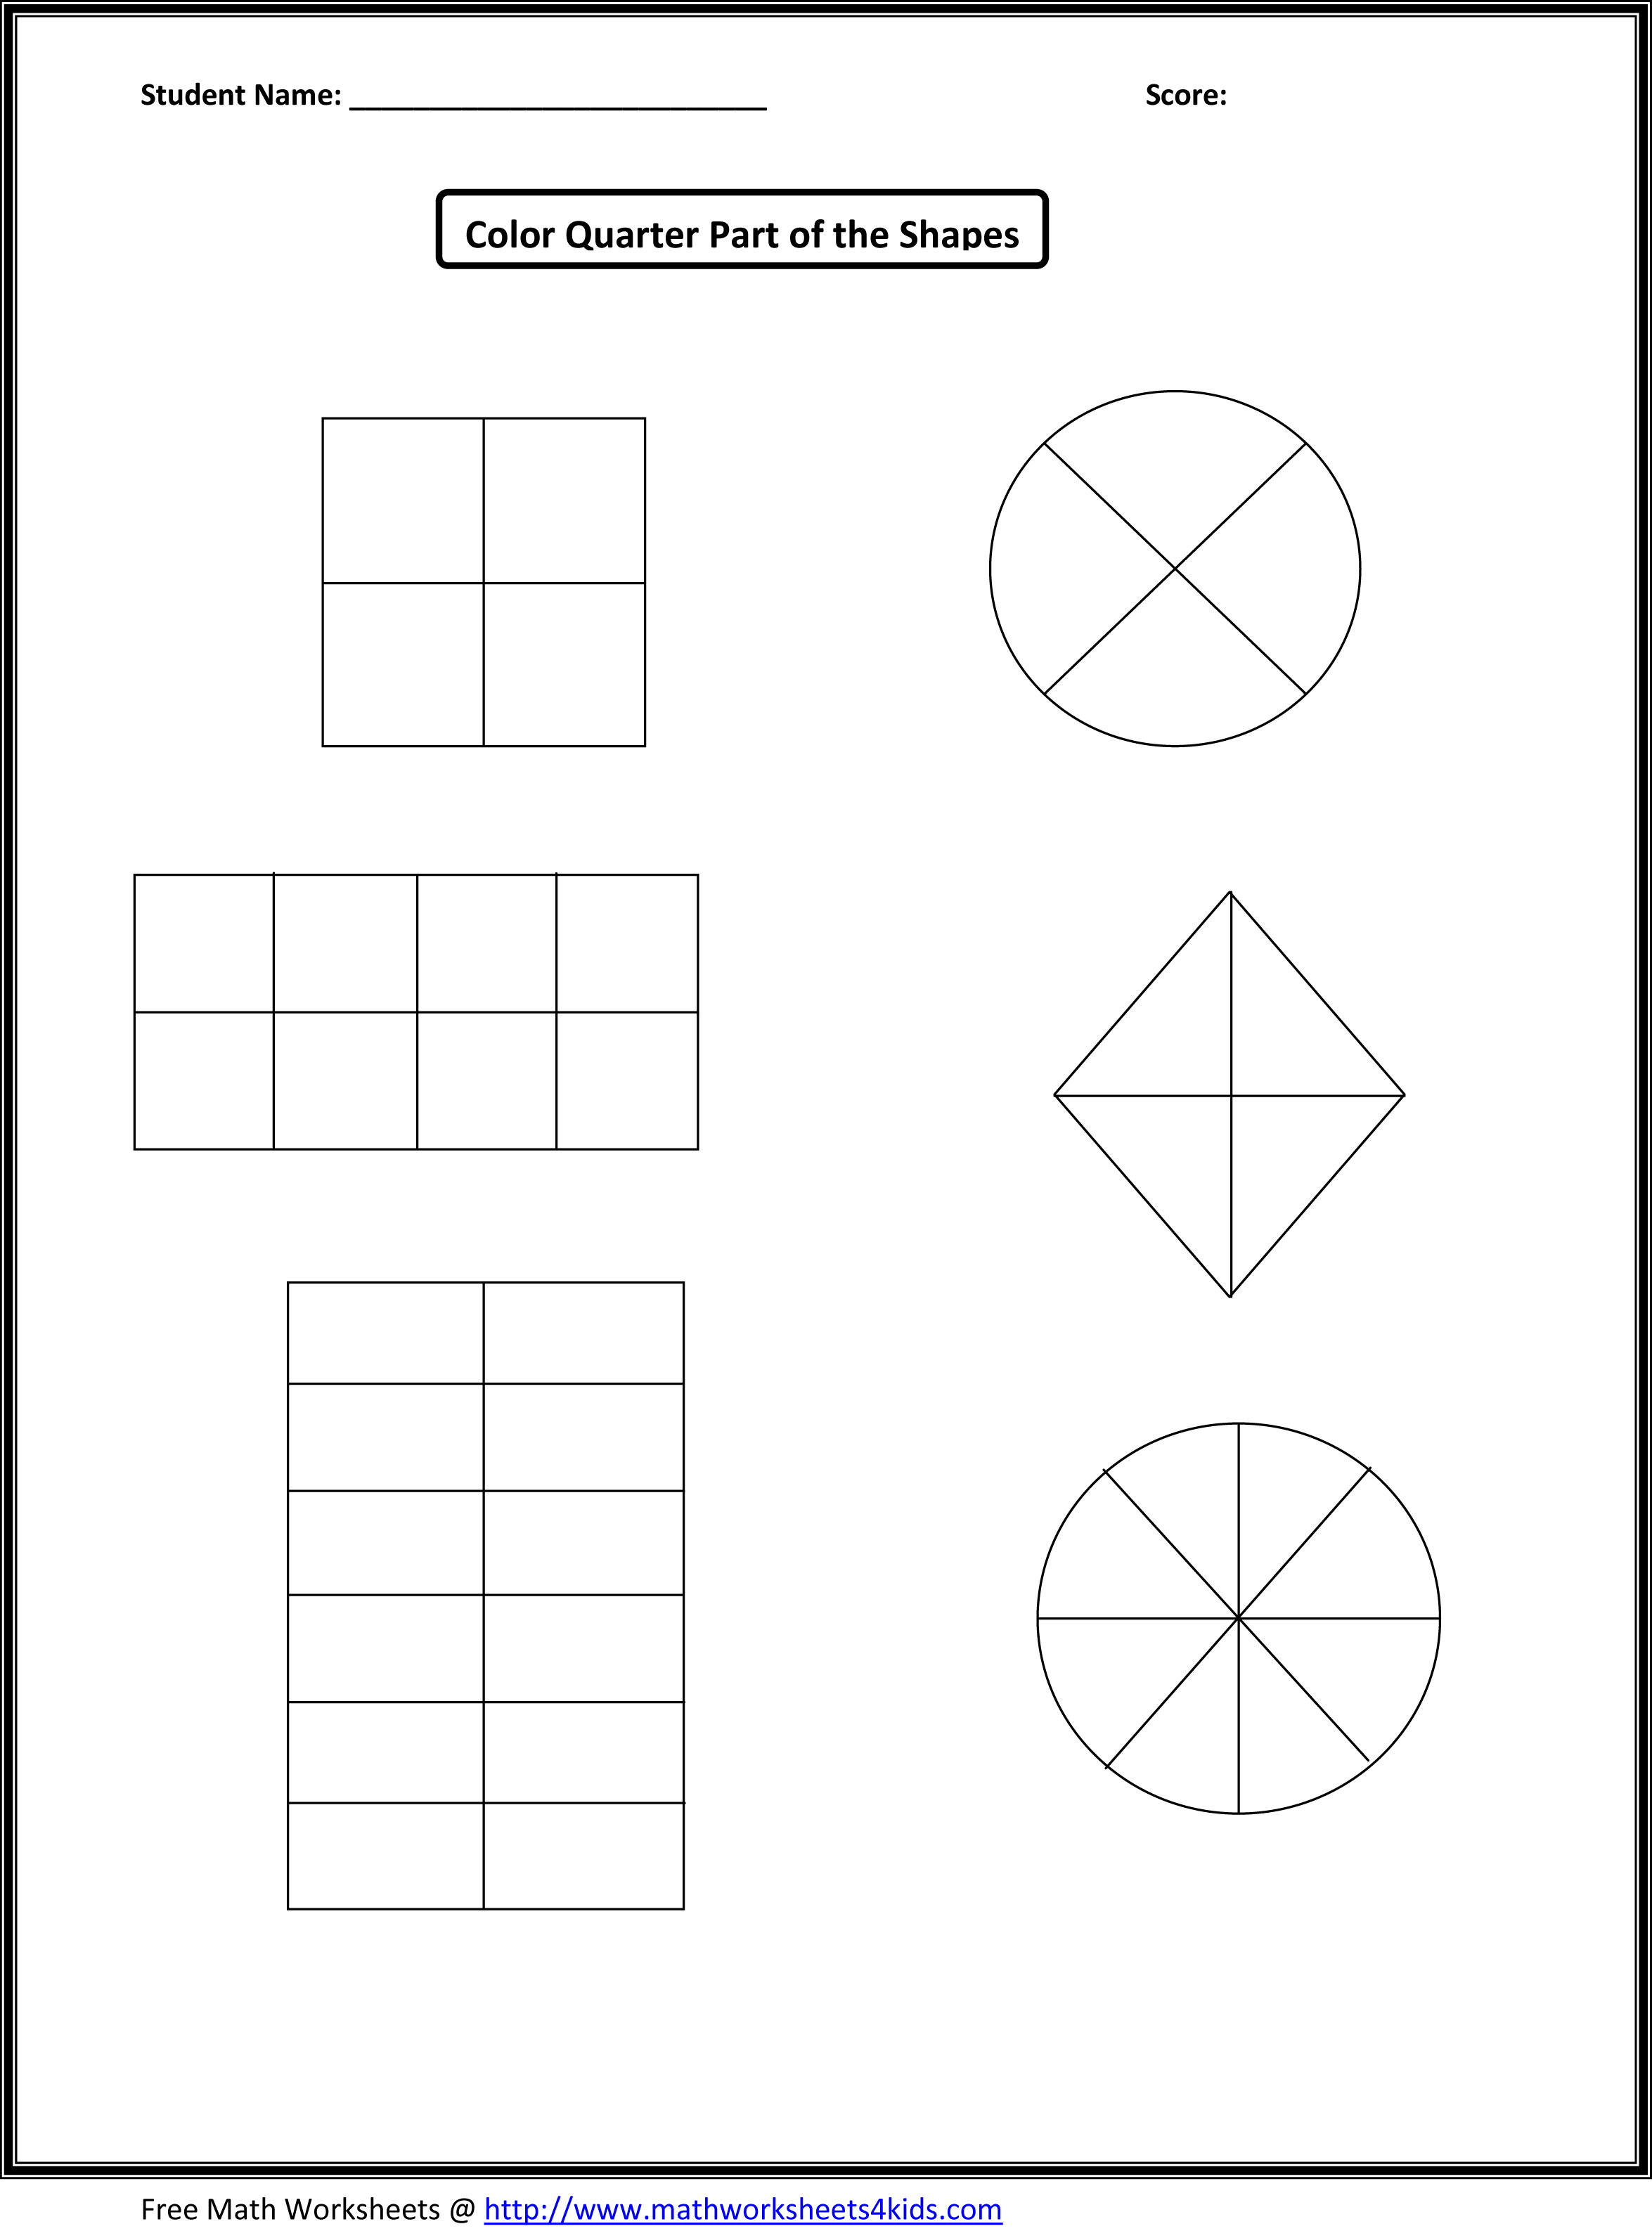 12 Best Images of Basic First Grade Fractions Worksheets - First Grade